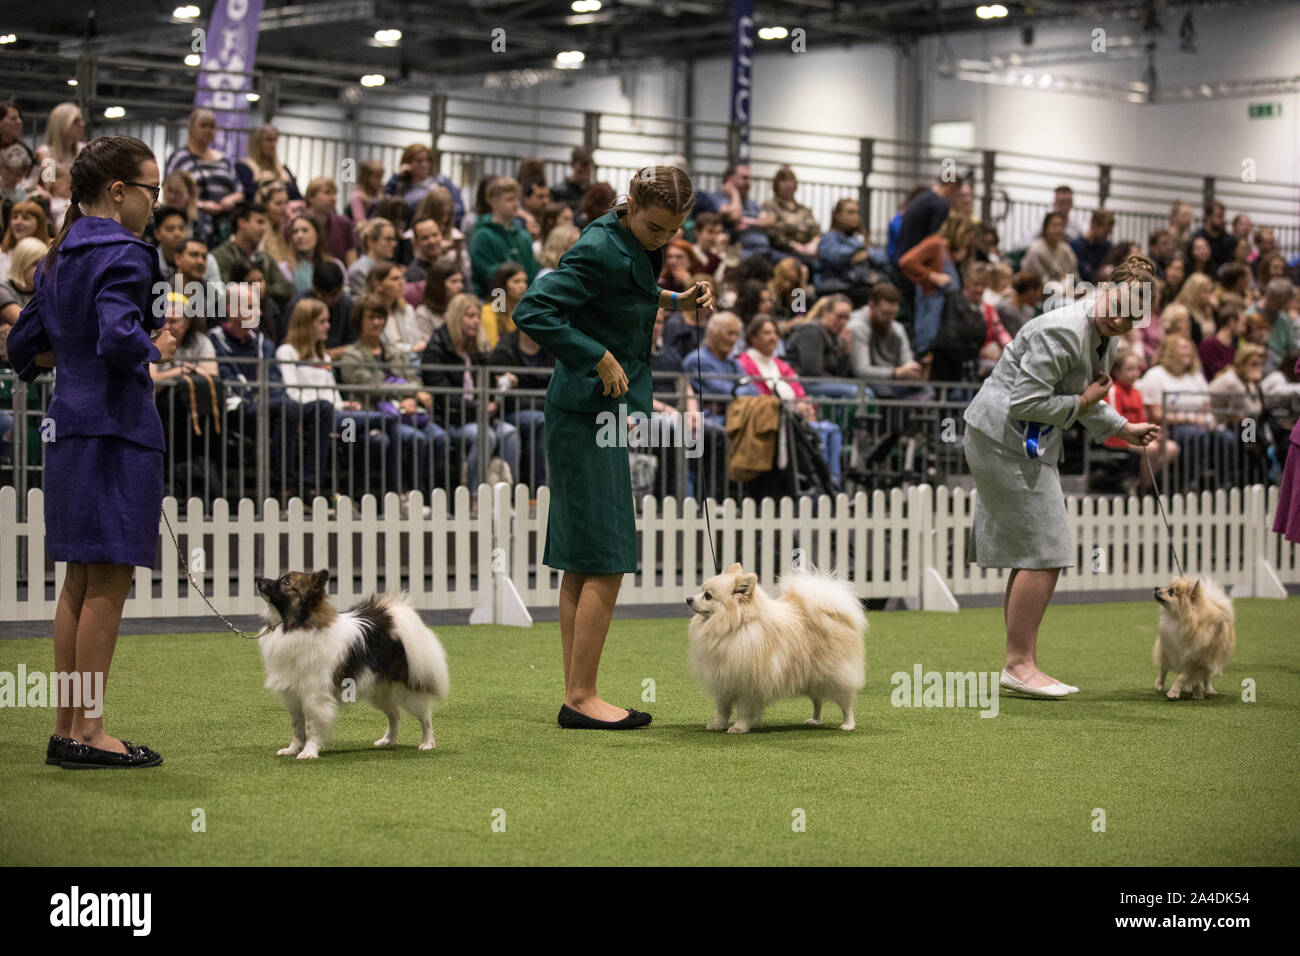 The Kennel Club Discovery Dogs exhibition at Excel London, UK Picture shows the final judging of the UK Junior Handler of the Year 2019. Stock Photo